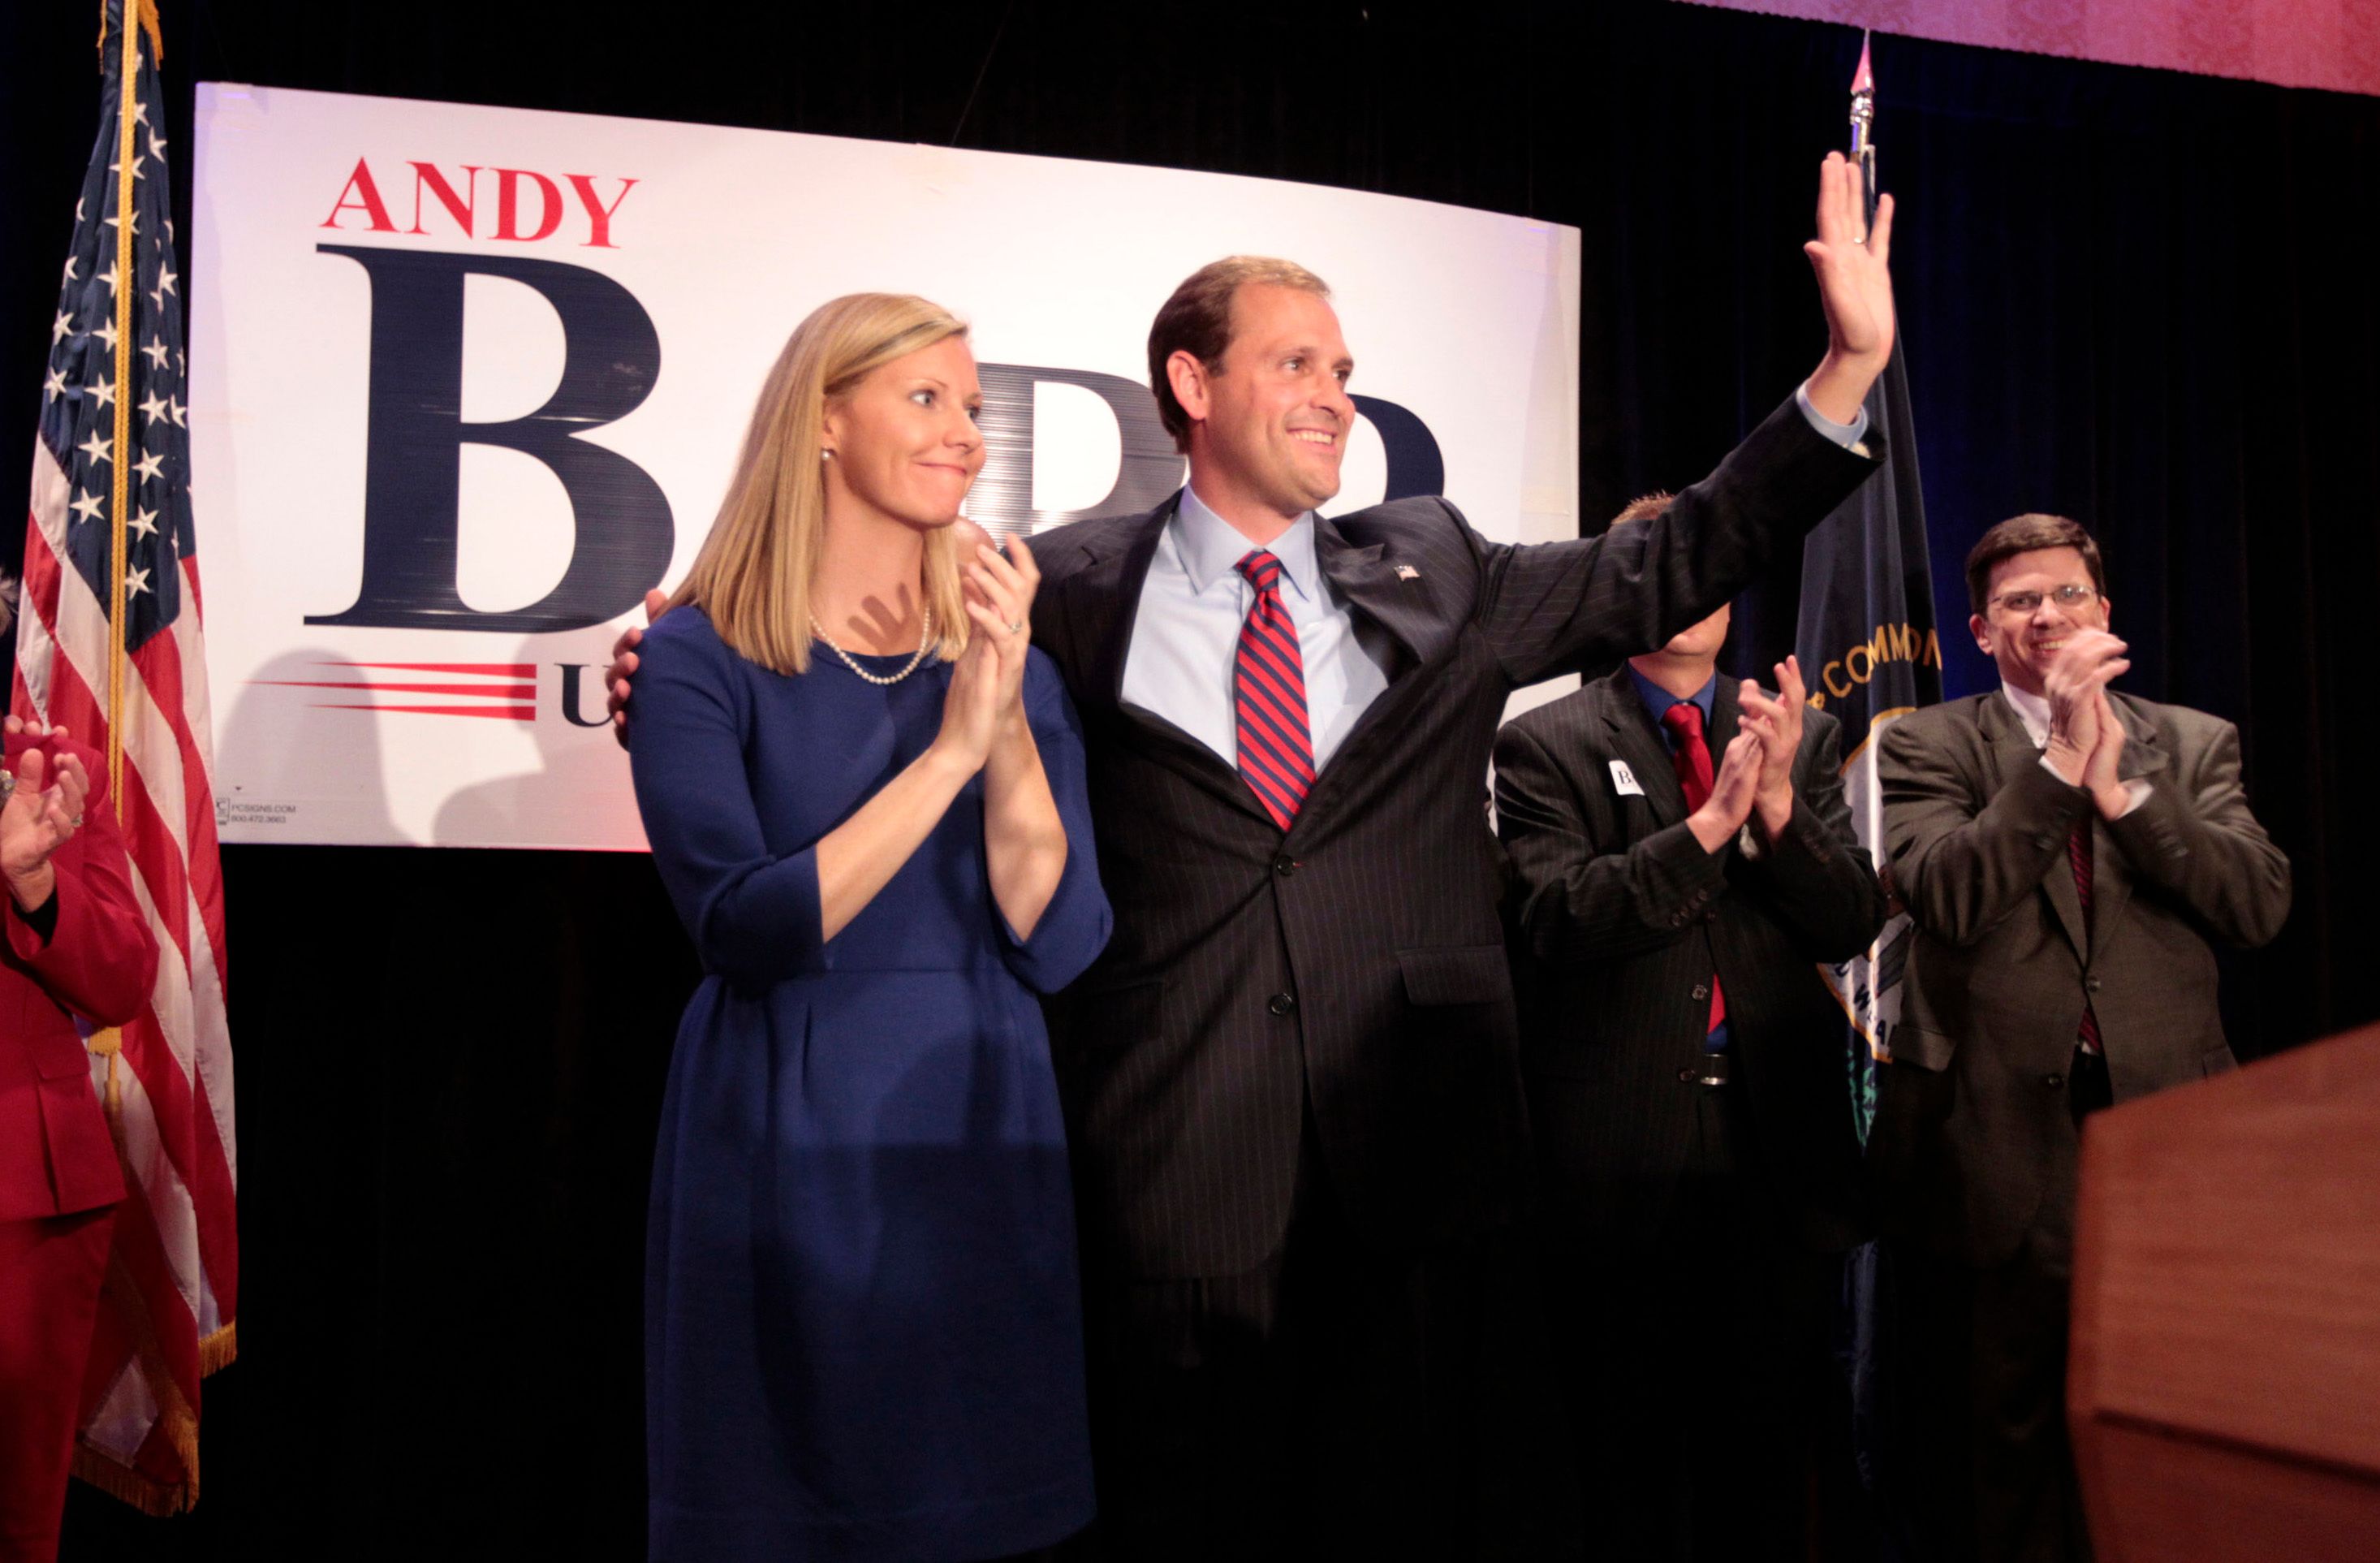 Election Day Republican Andy Barr, with wife Carol Barr| Photo: Getty Images